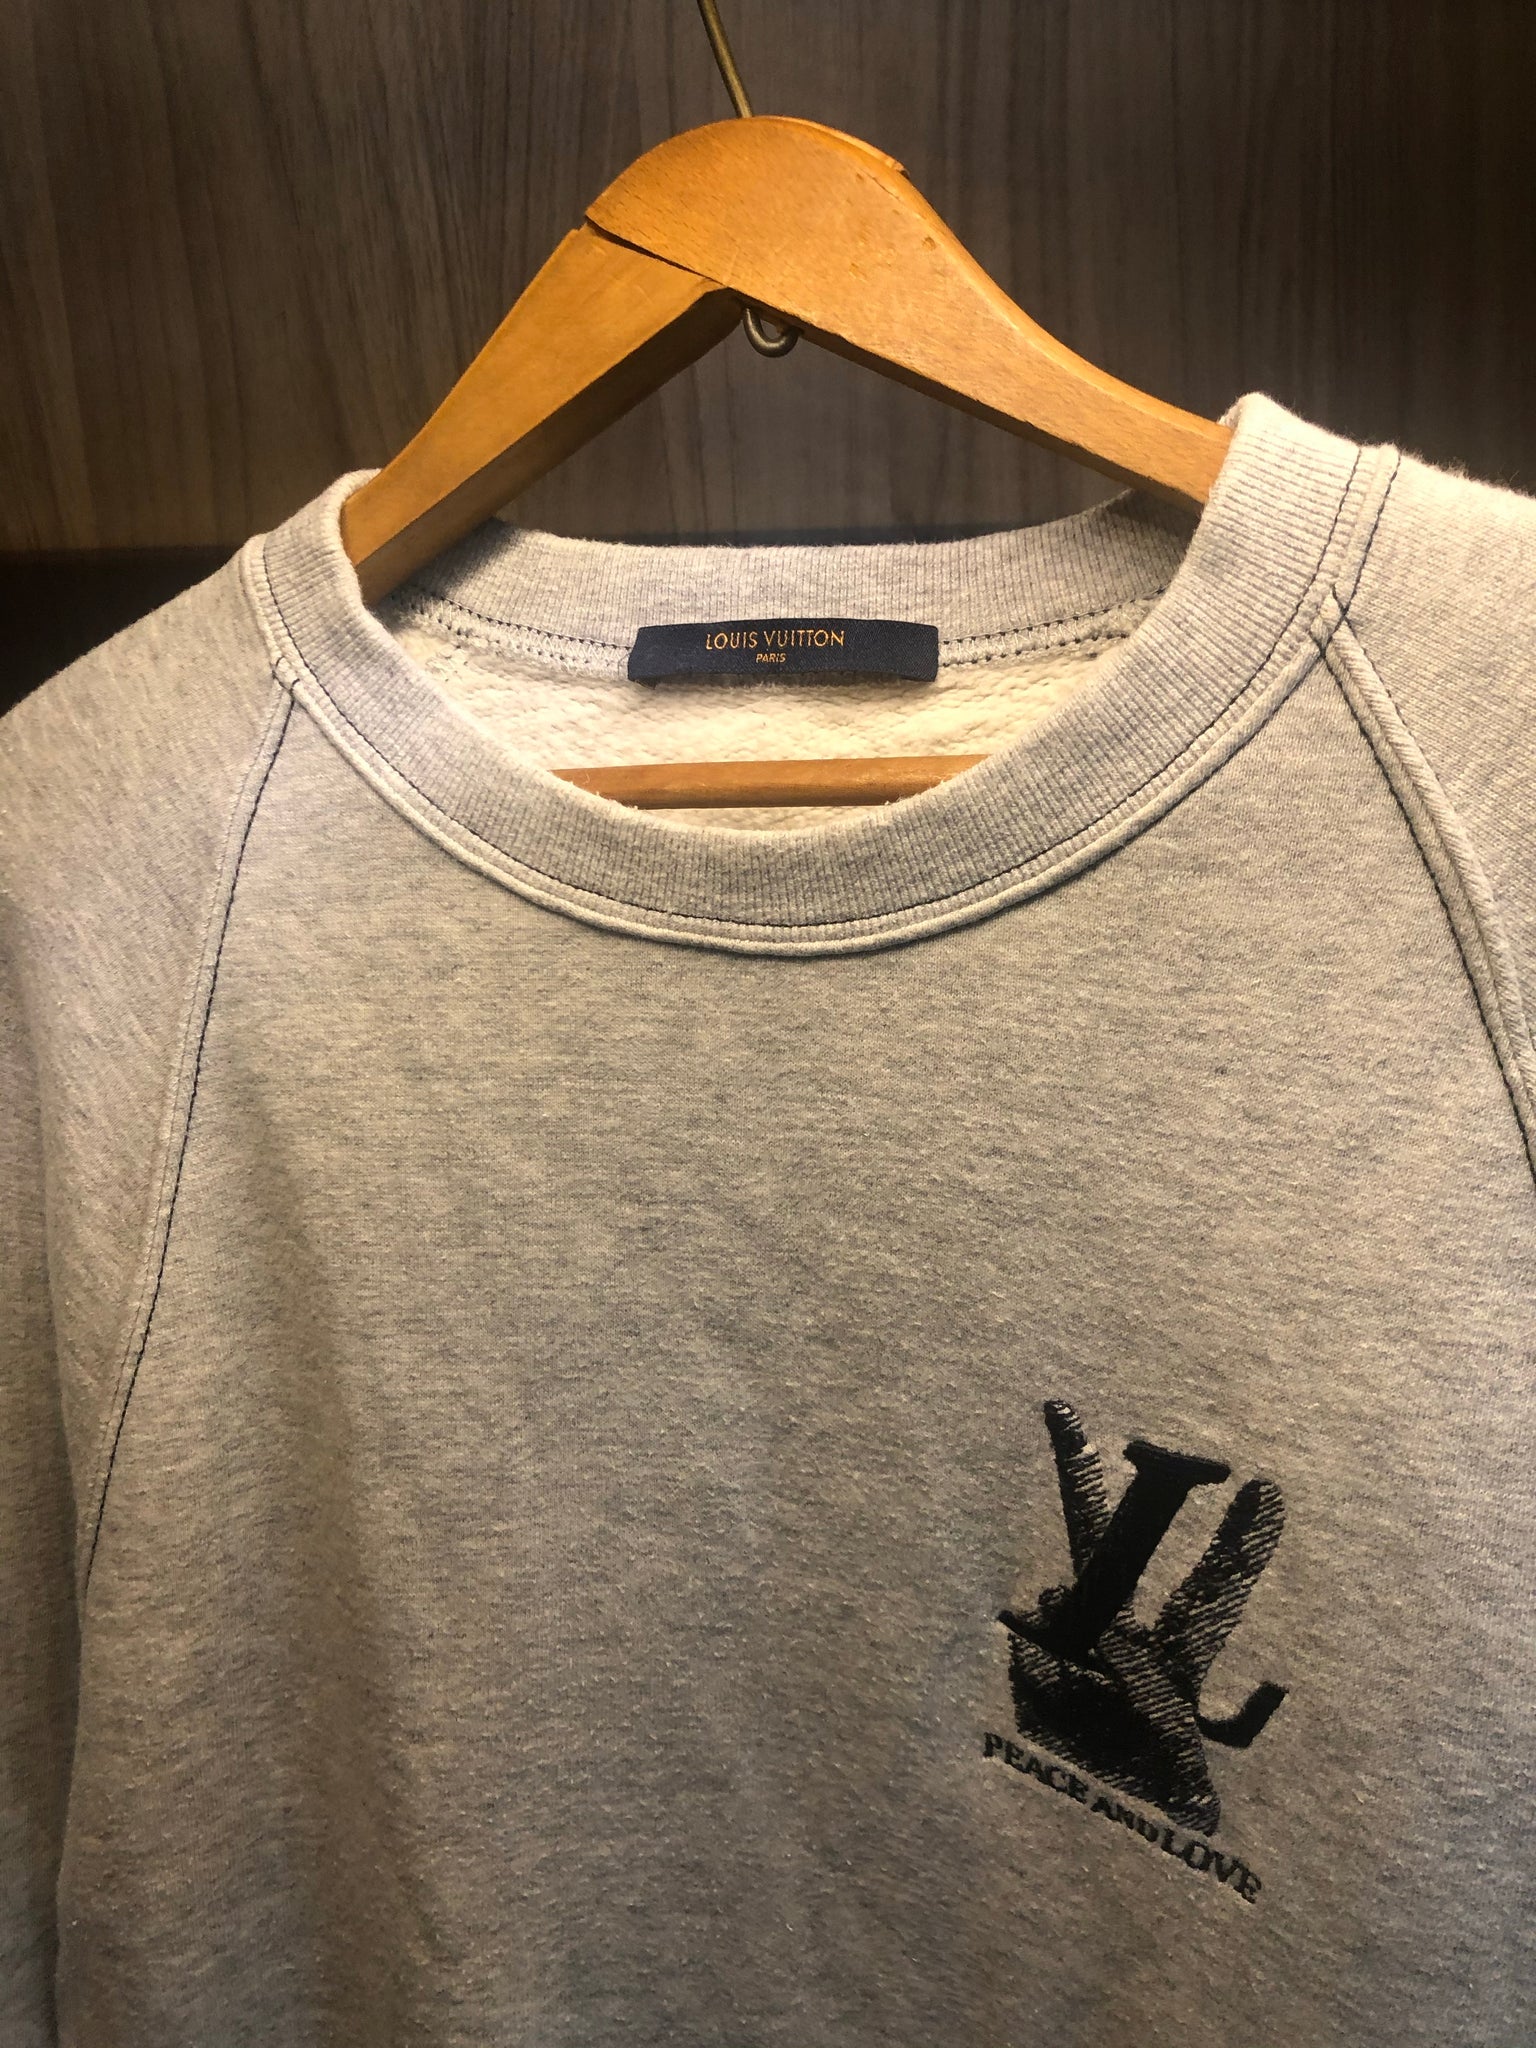 Louis Vuitton Peace and Love Sweater